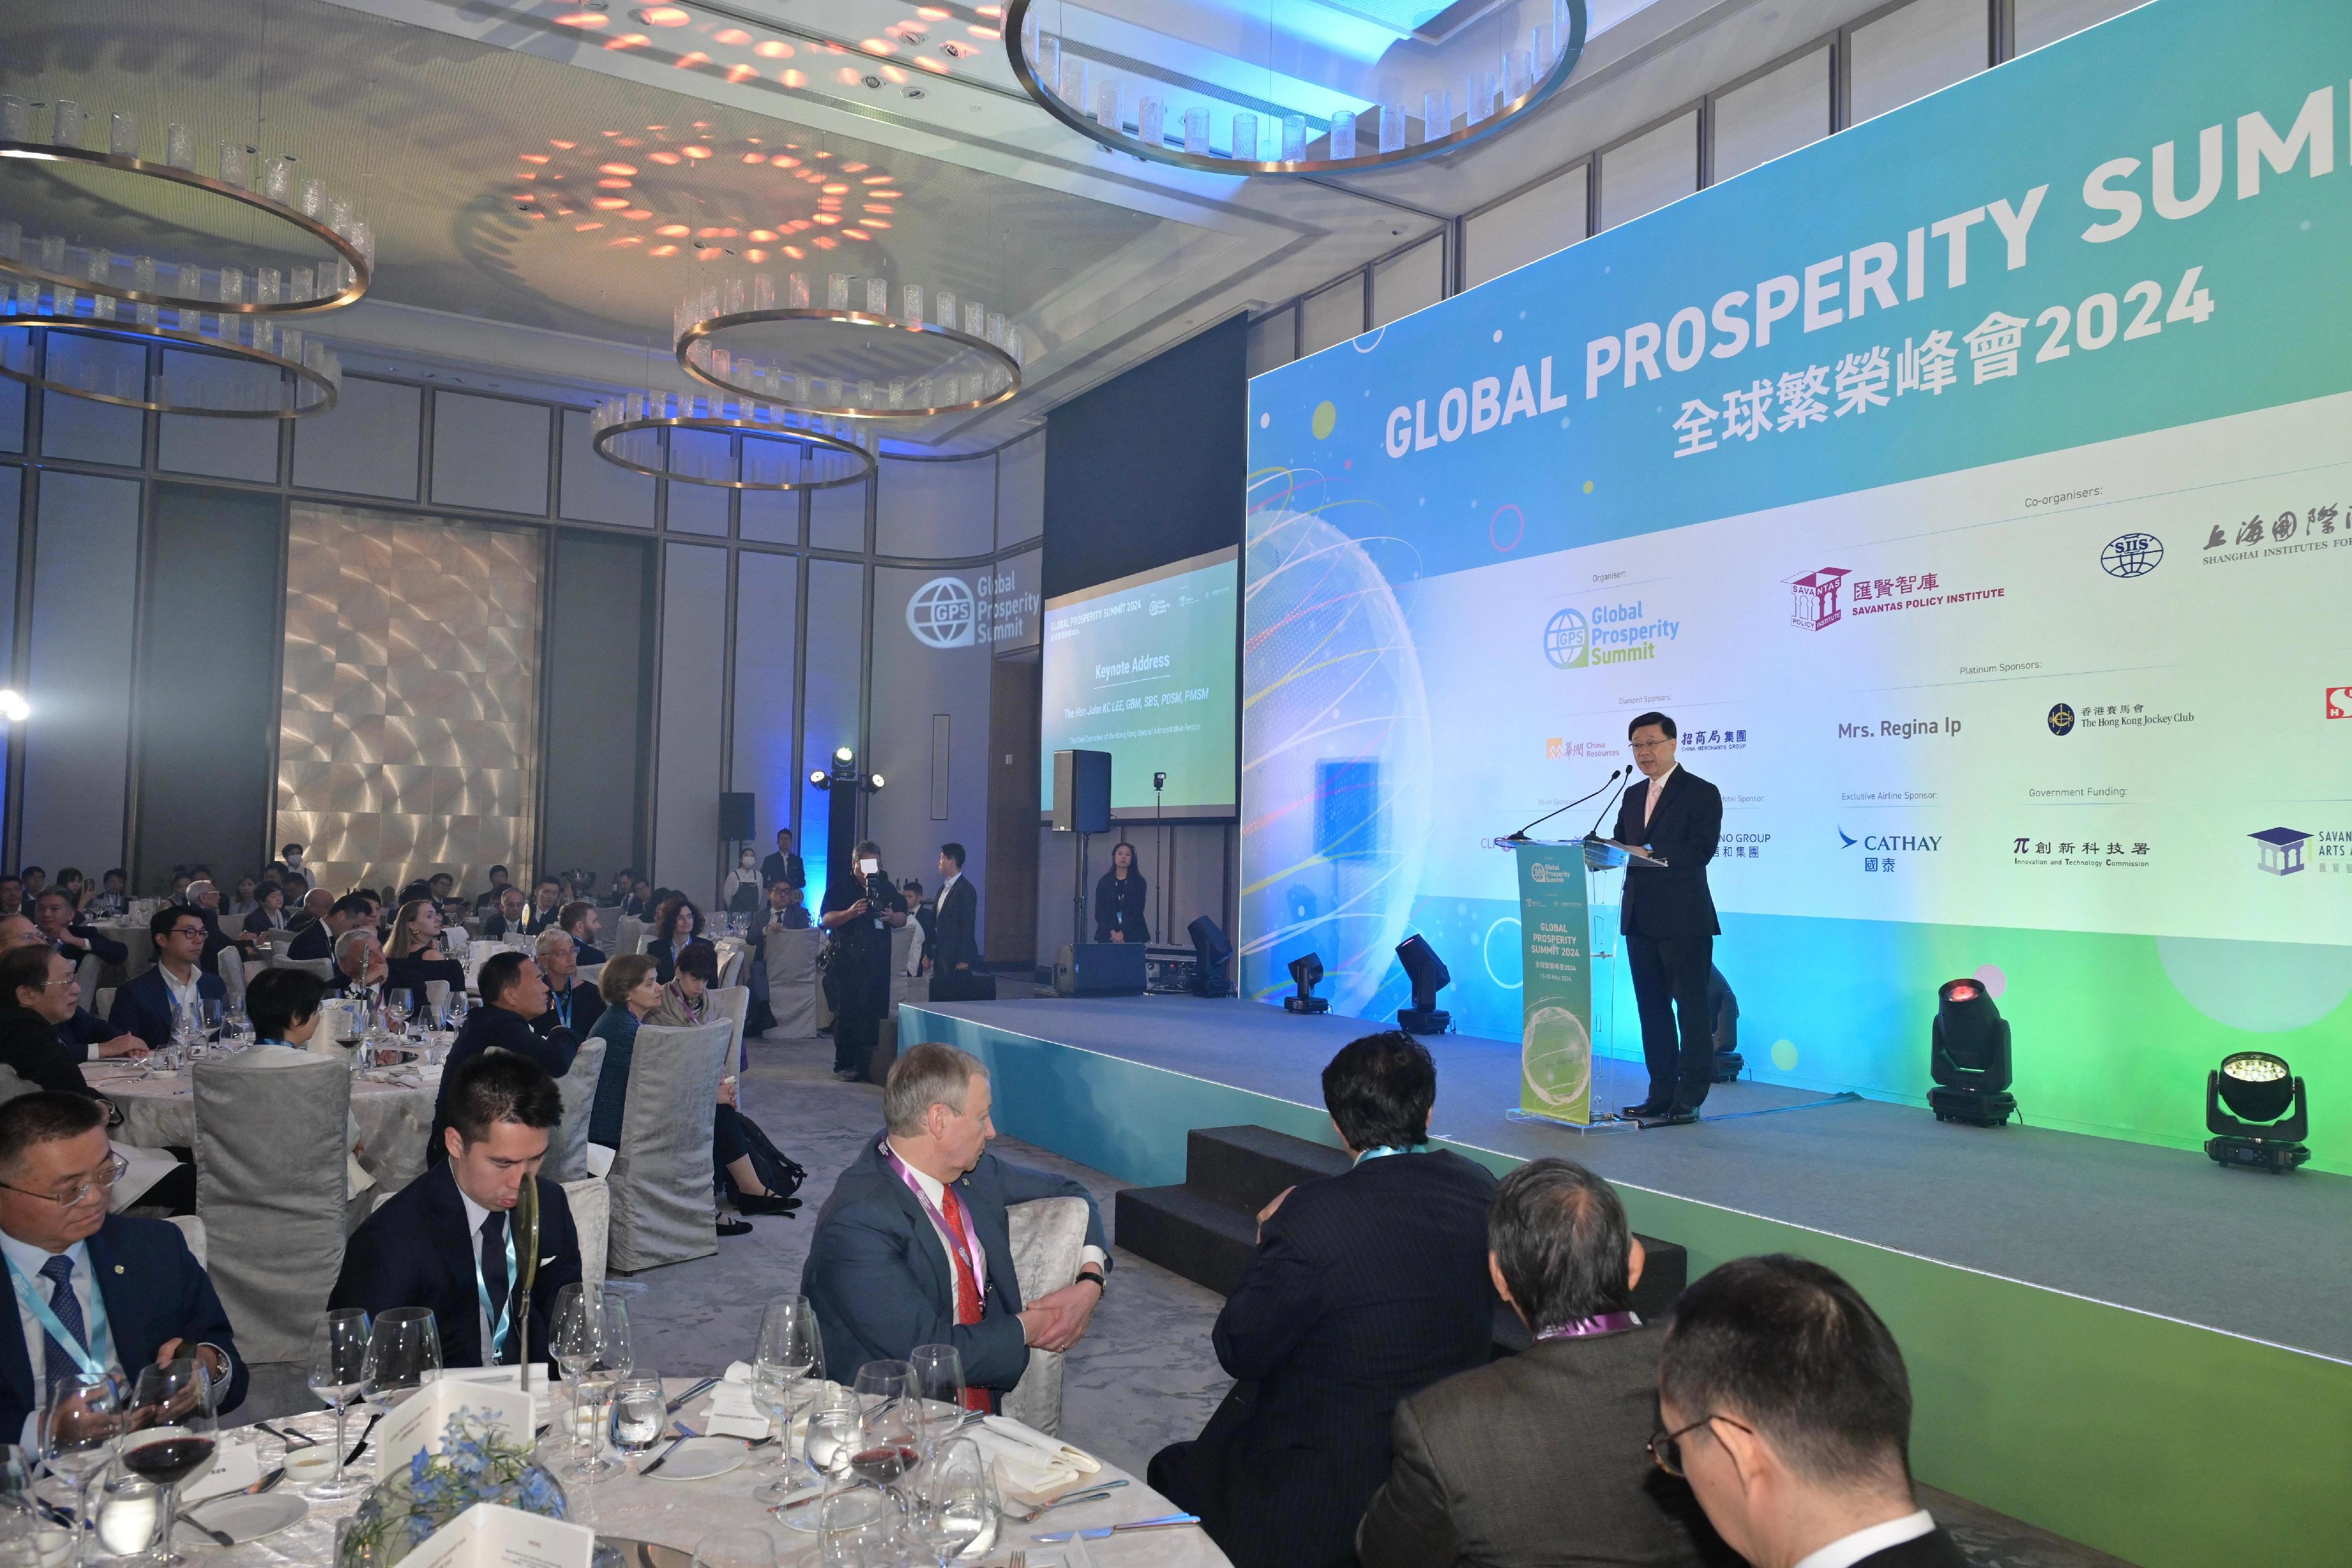 The Chief Executive, Mr John Lee, speaks at the Welcome Dinner for the Global Prosperity Summit 2024 this evening (May 13).